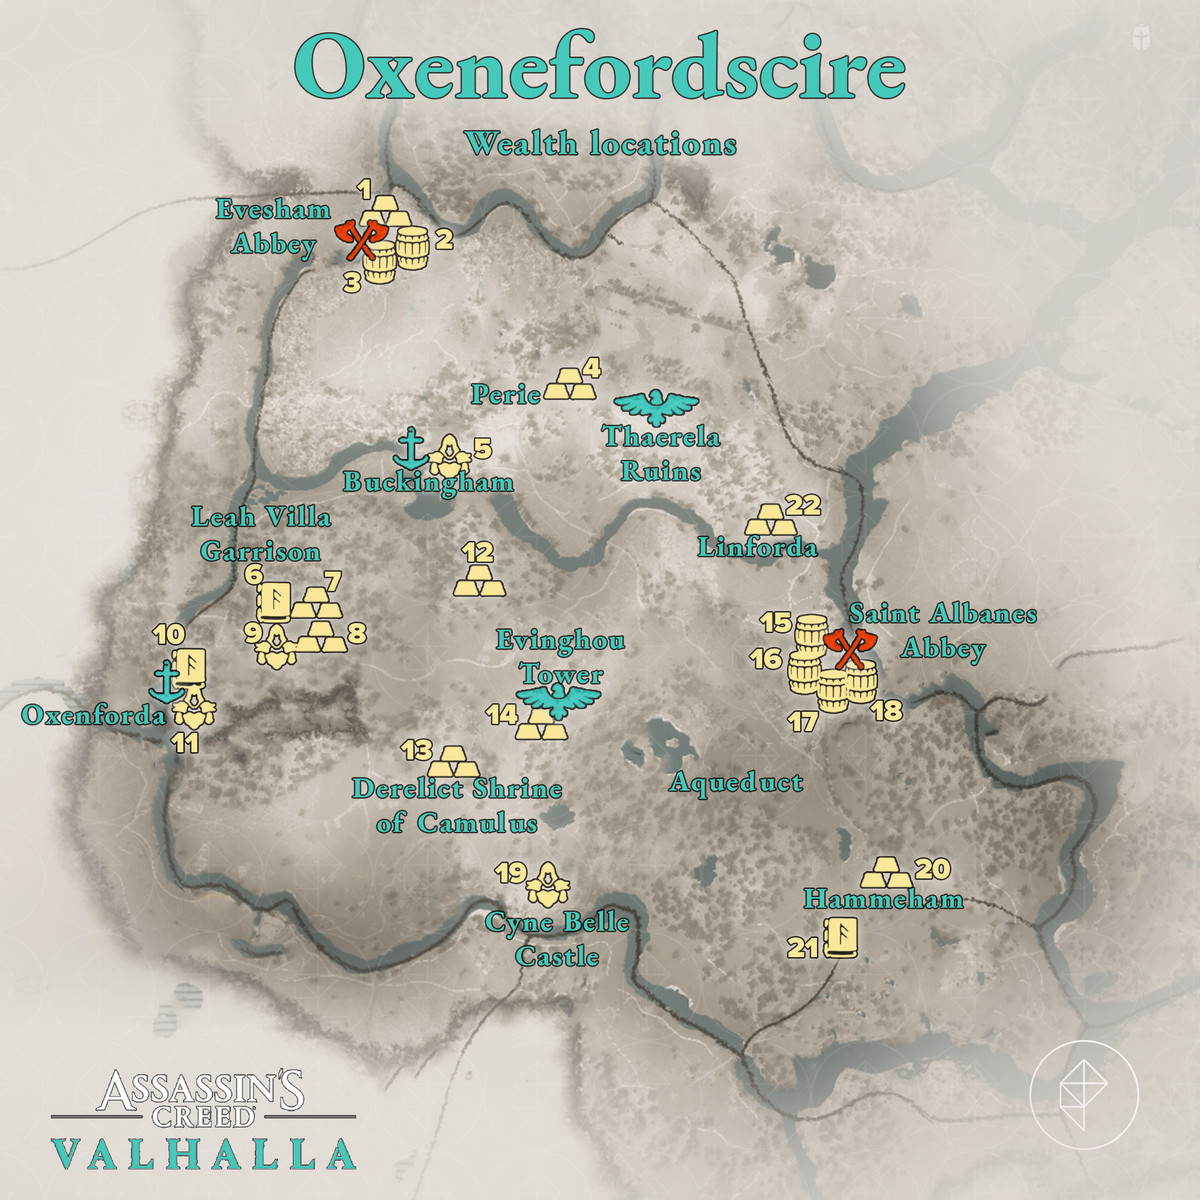 Oxenefordscire Wealth locations map 